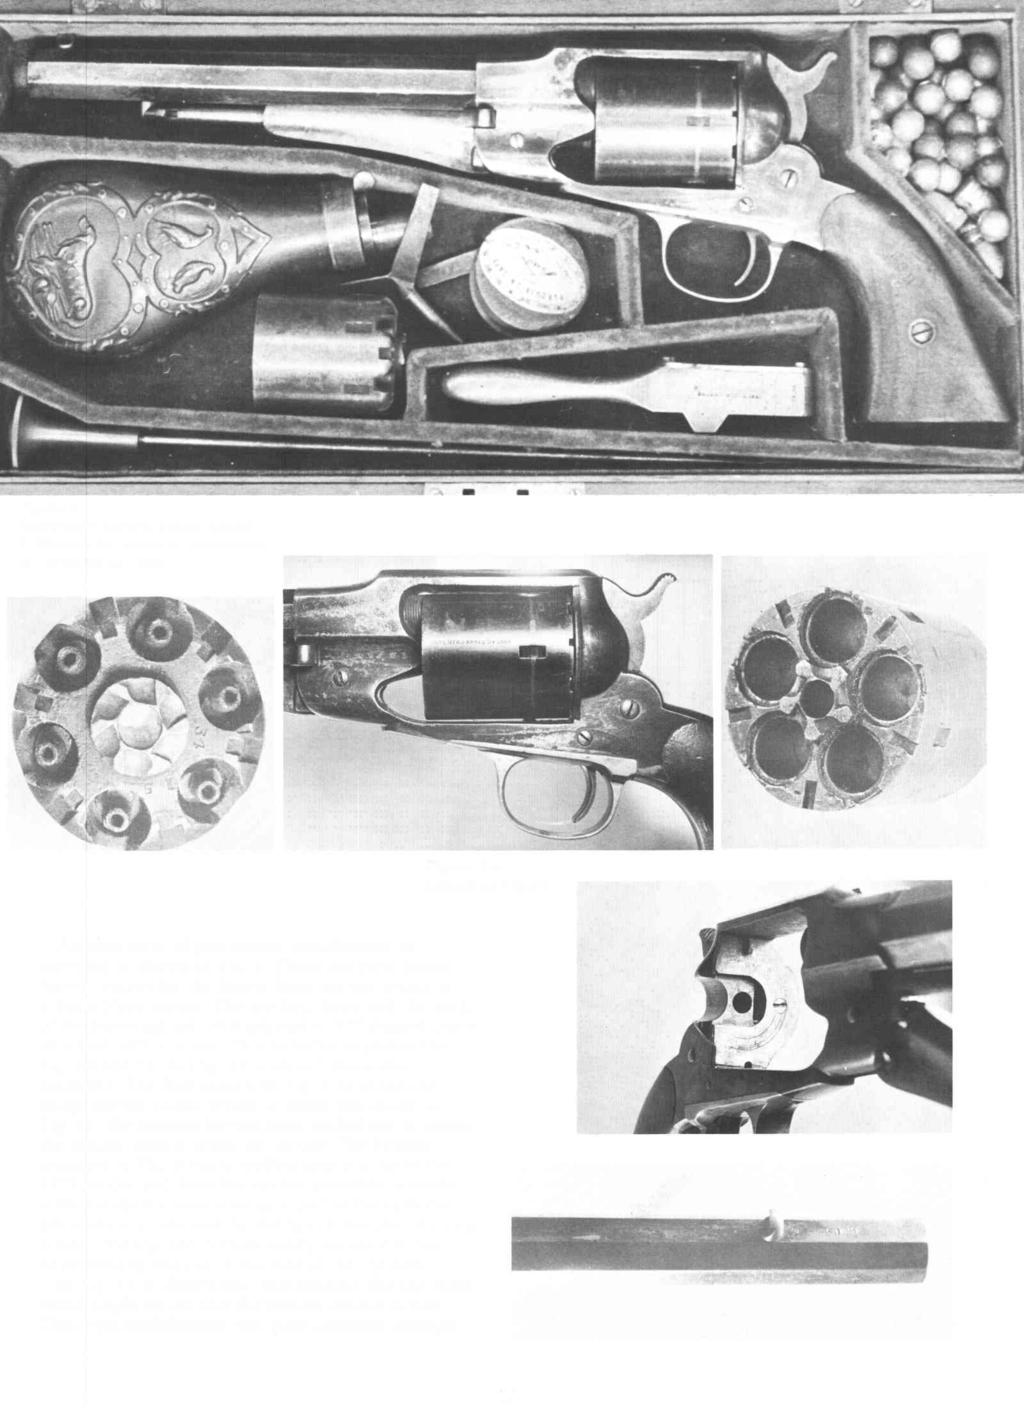 - F~gure 1 Remlngton contract w~th Smlth & Wesson for revolver conversion to cartridge in 1868 r-.